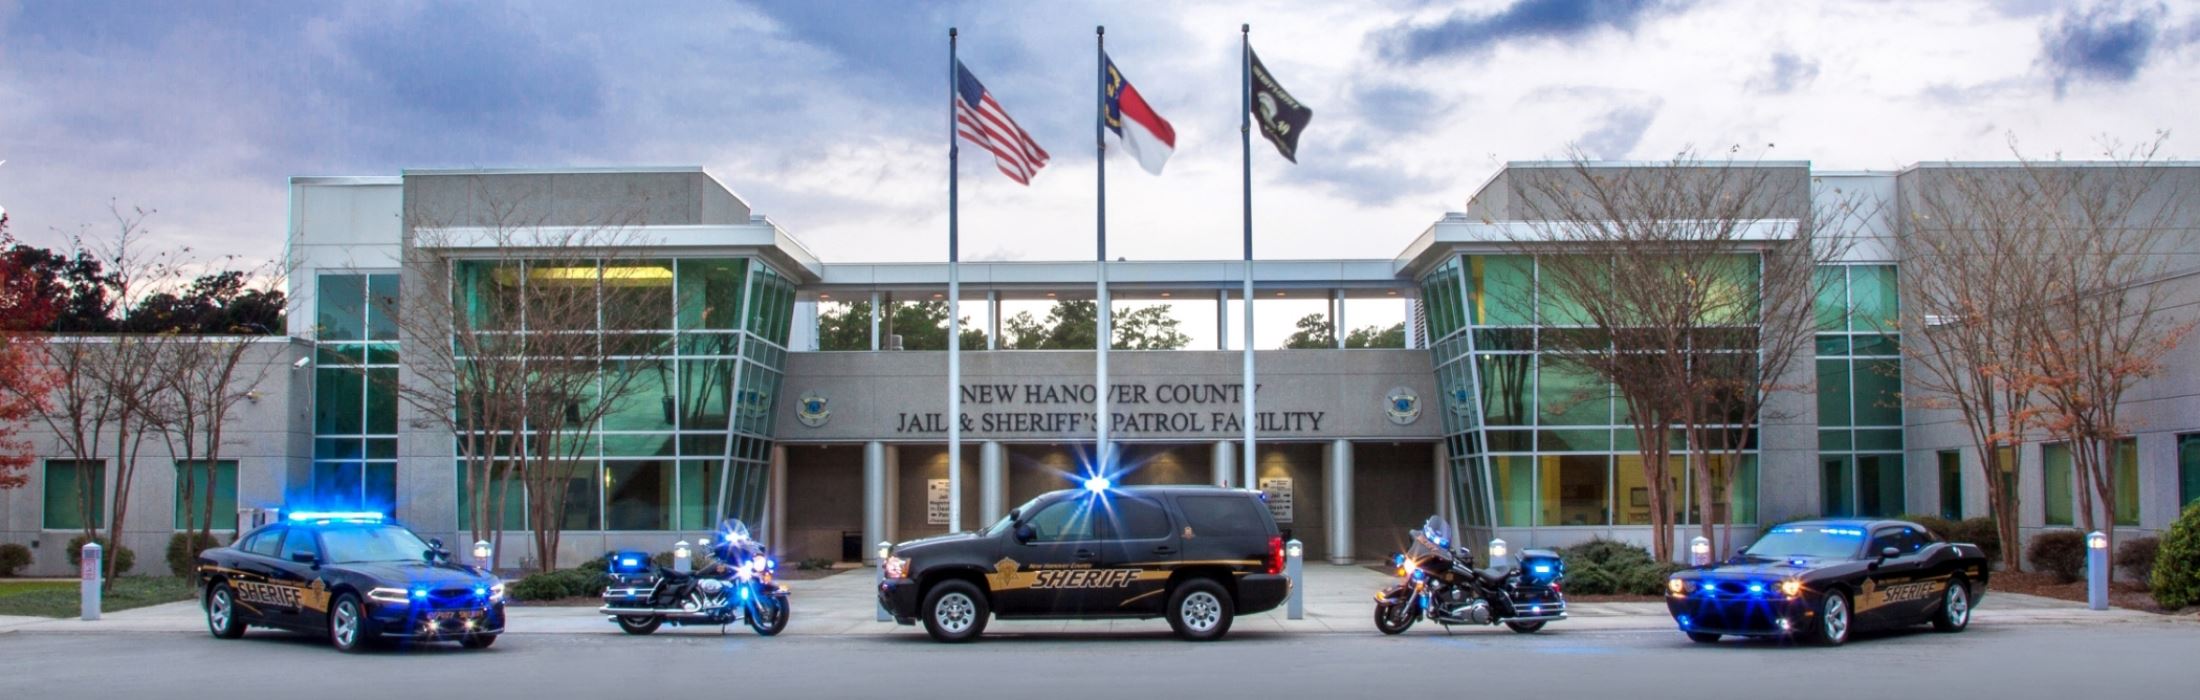 Image of New Hanover County Sheriff's Office